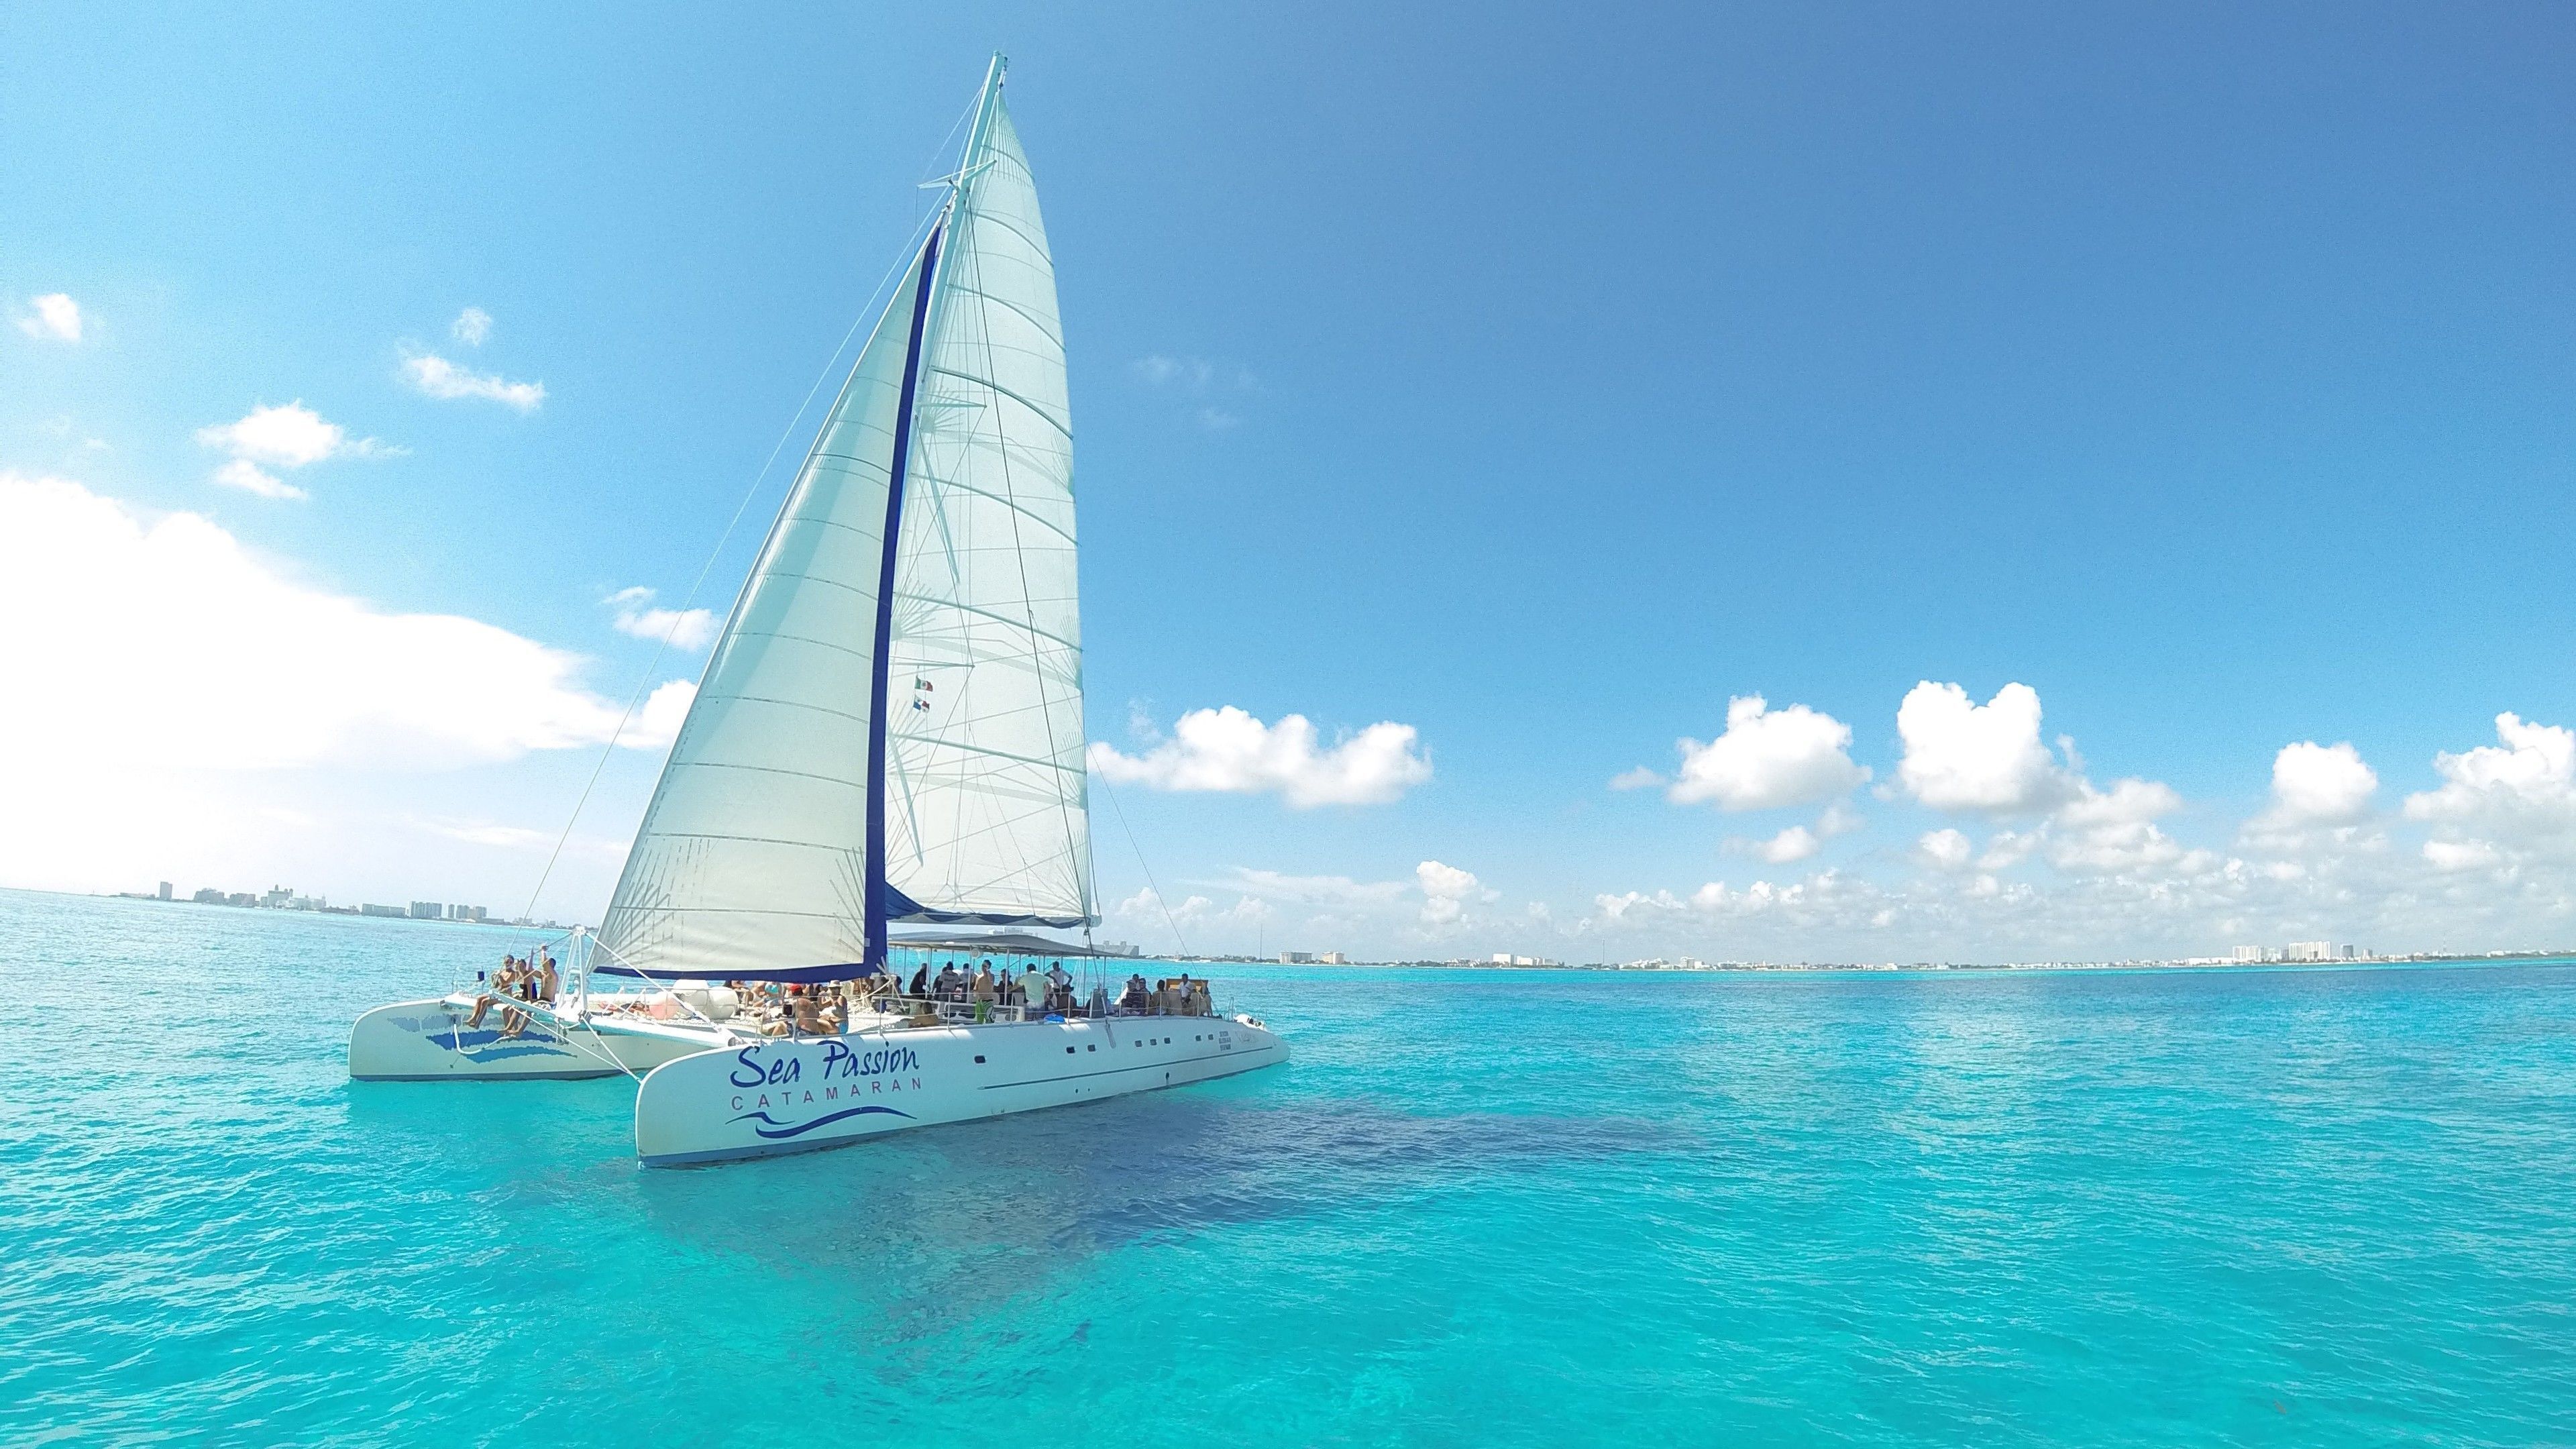 Isla Mujeres Catamaran Tour with Lunch & Open Bar: Isla Mujeres Catamaran Tour with Lunch & Open Bar